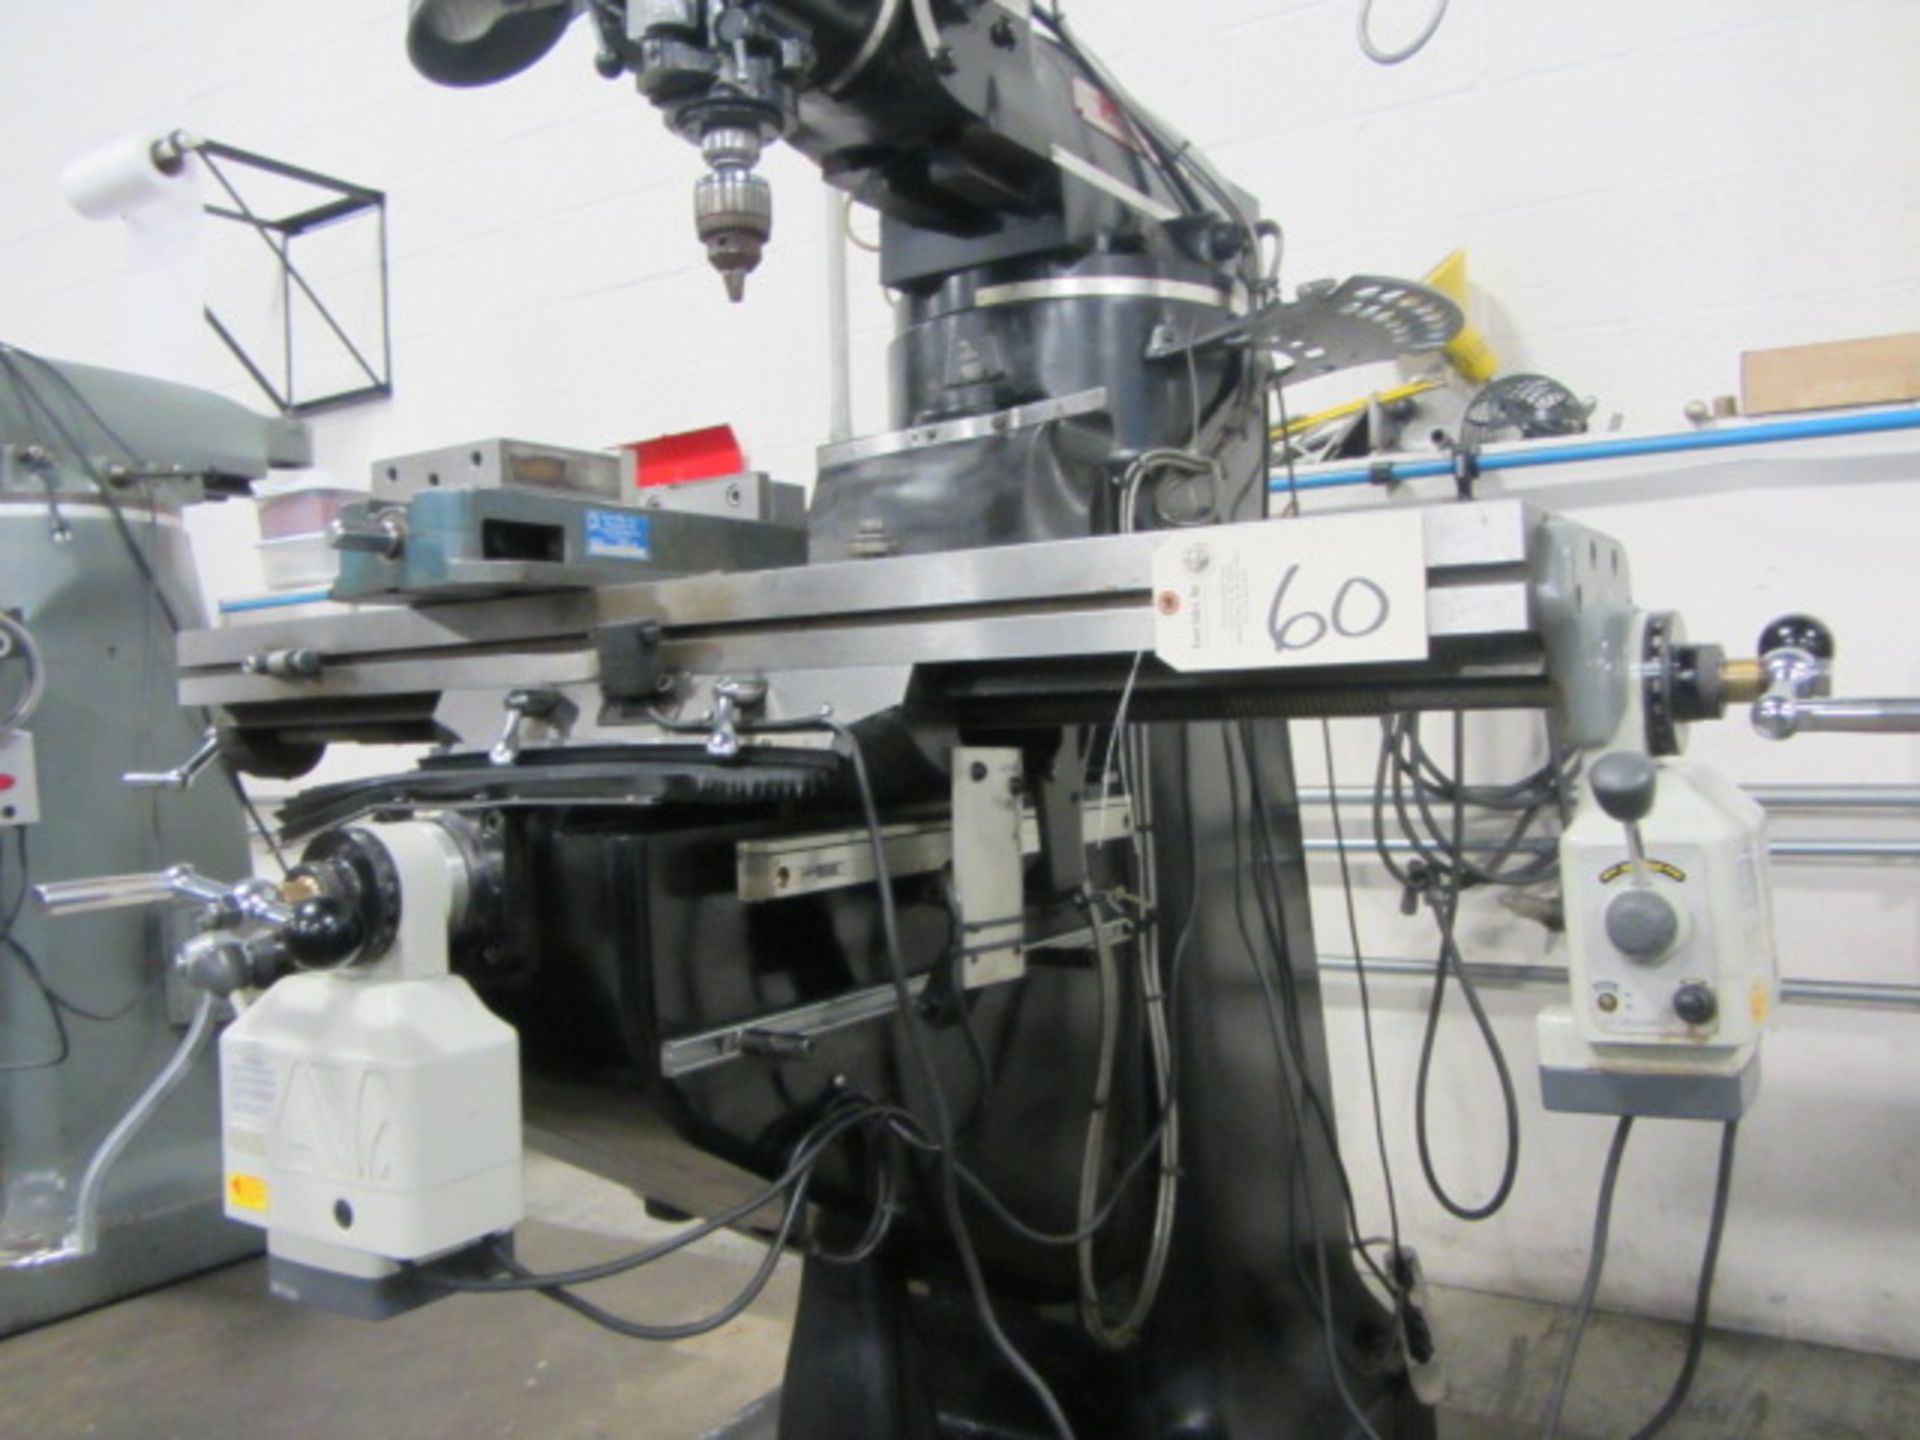 Vectrax Vari-Speed Vertical Milling Machine with 9'' x 48'' Power Feed Table, Longitudinal Power - Image 7 of 7